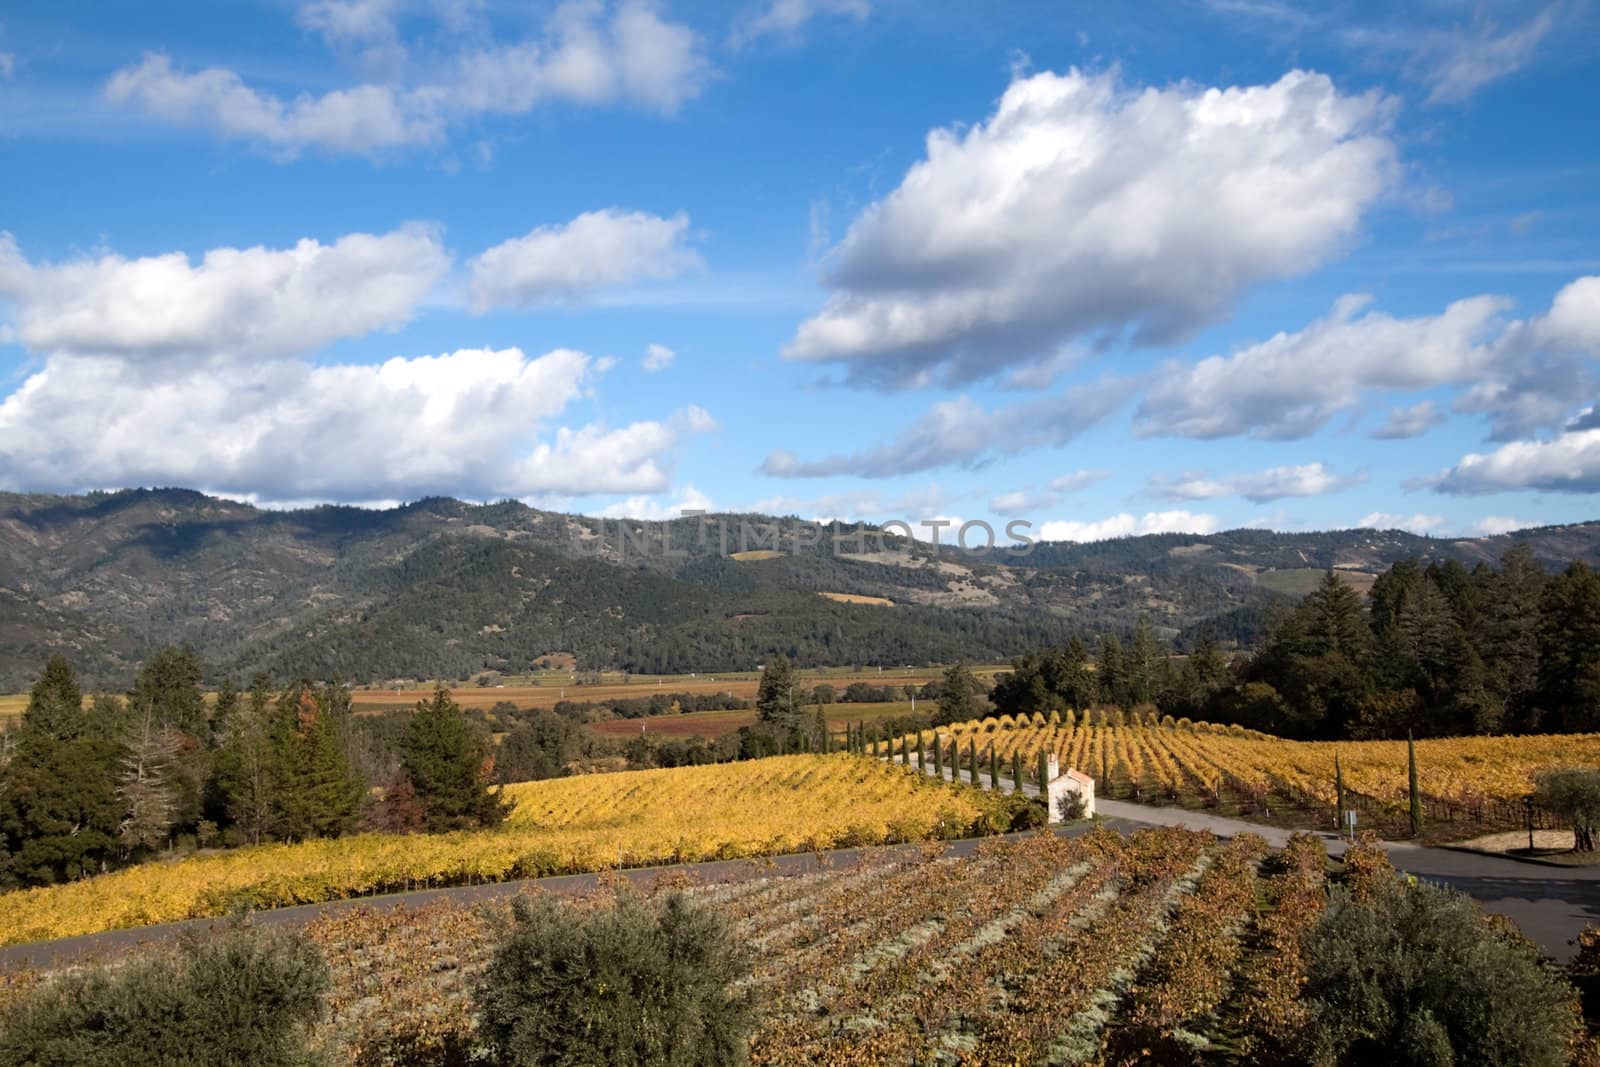 The hillsides of Napa Valley wine country